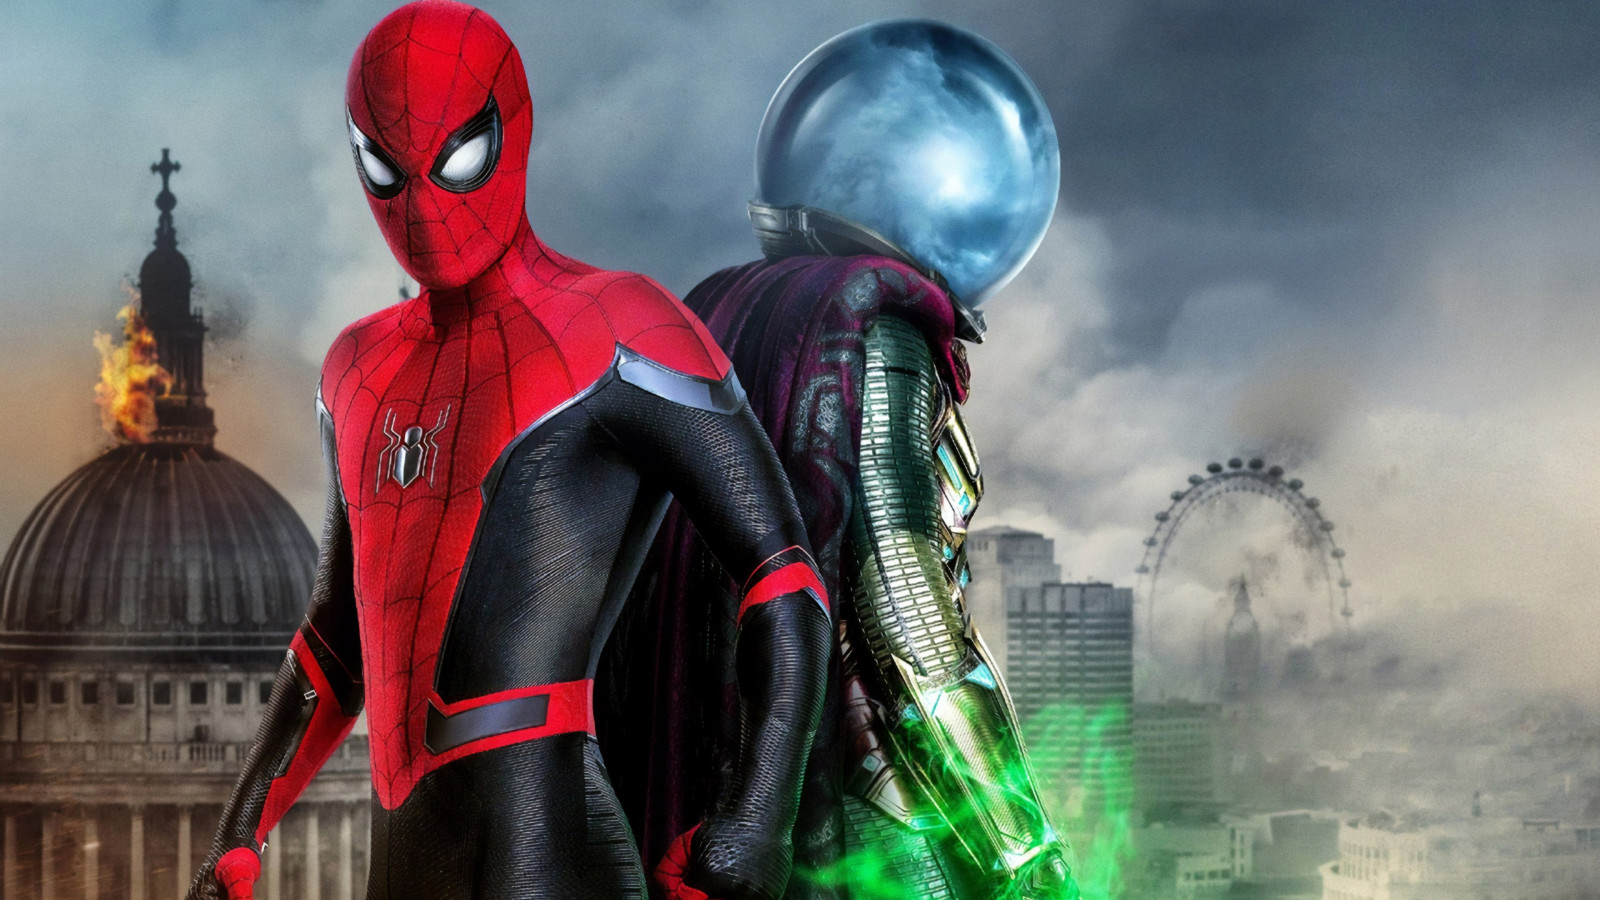 Download wallpaper: Spider Man and Mysterio 1600x900